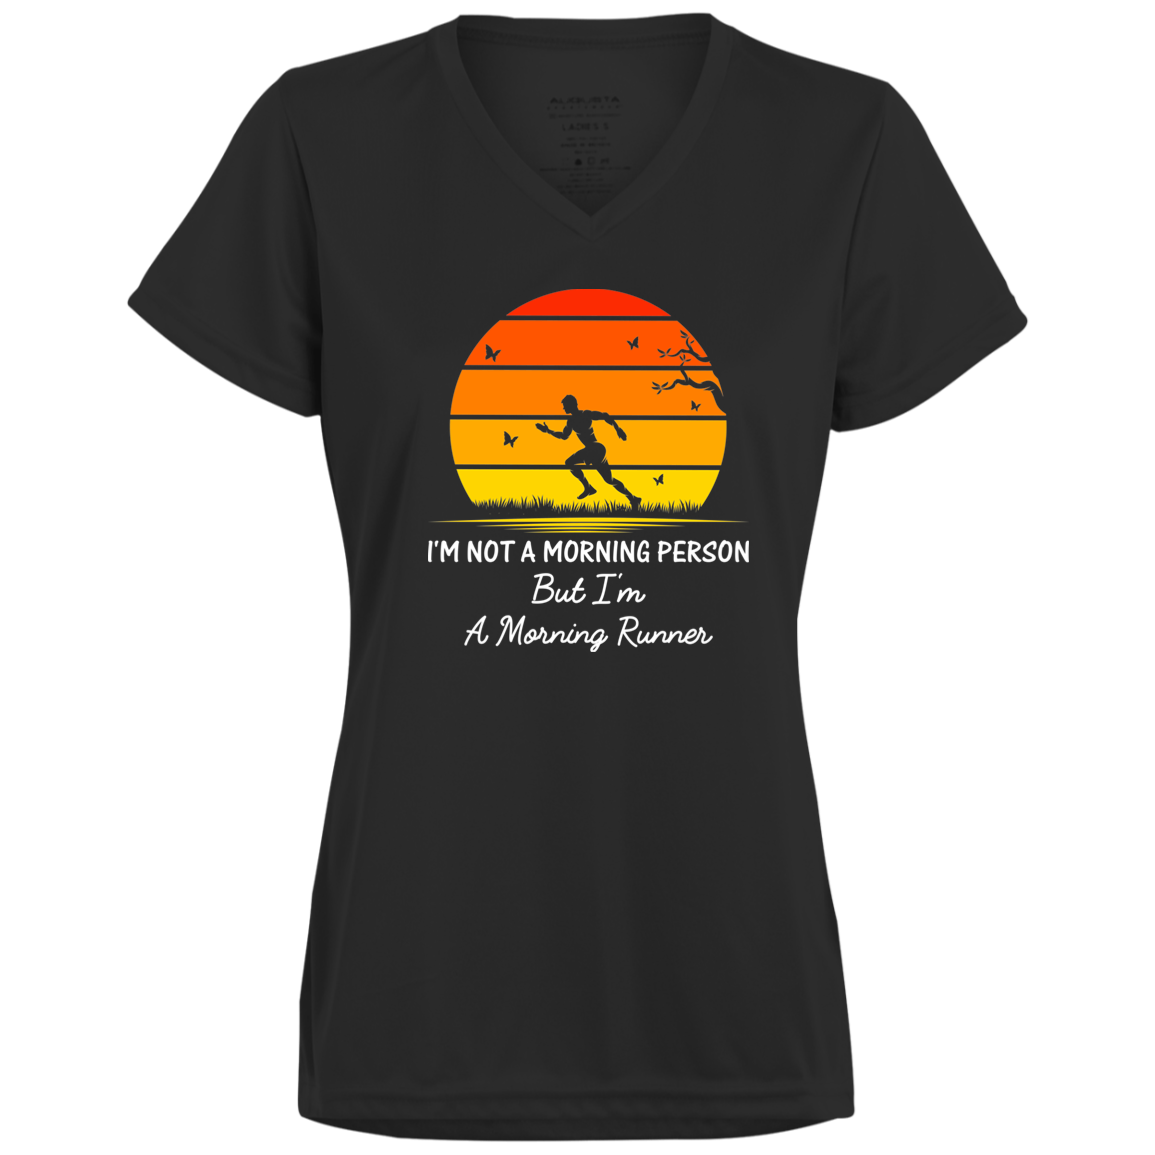 Women's Inspirational Top I'm not a morning person, but I'm a morning runner